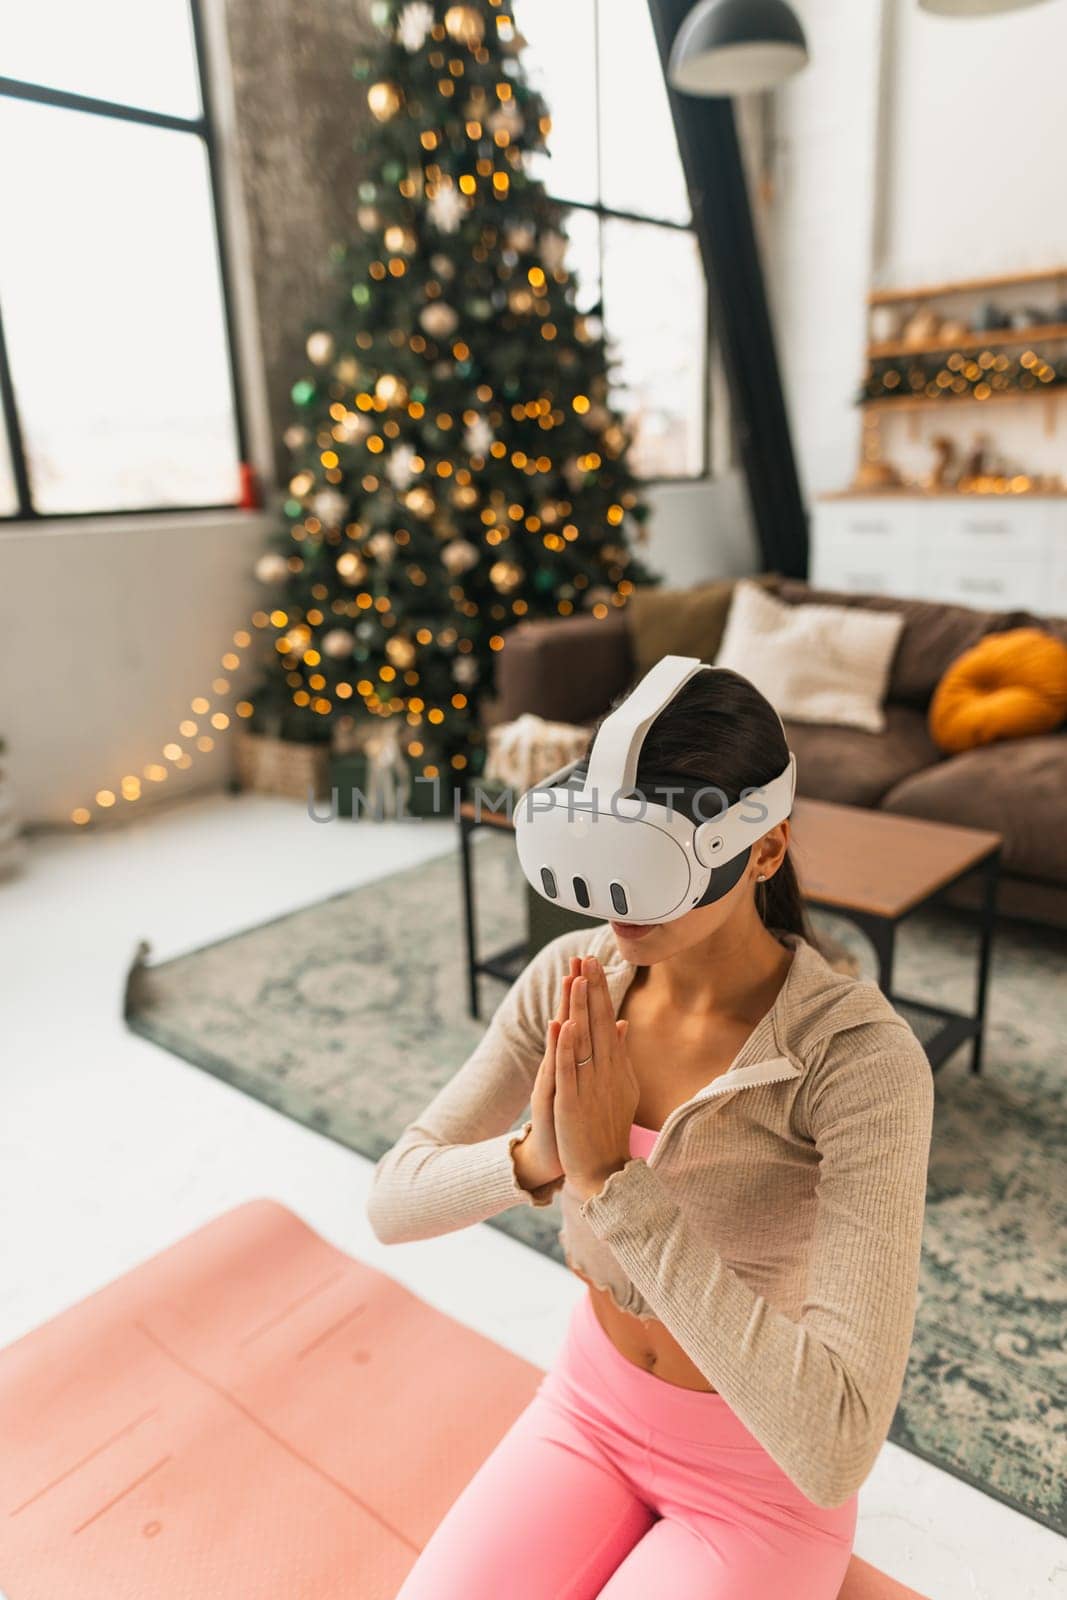 Using a virtual reality headset, a young lady in pink sportswear practices yoga near a Christmas tree. by teksomolika